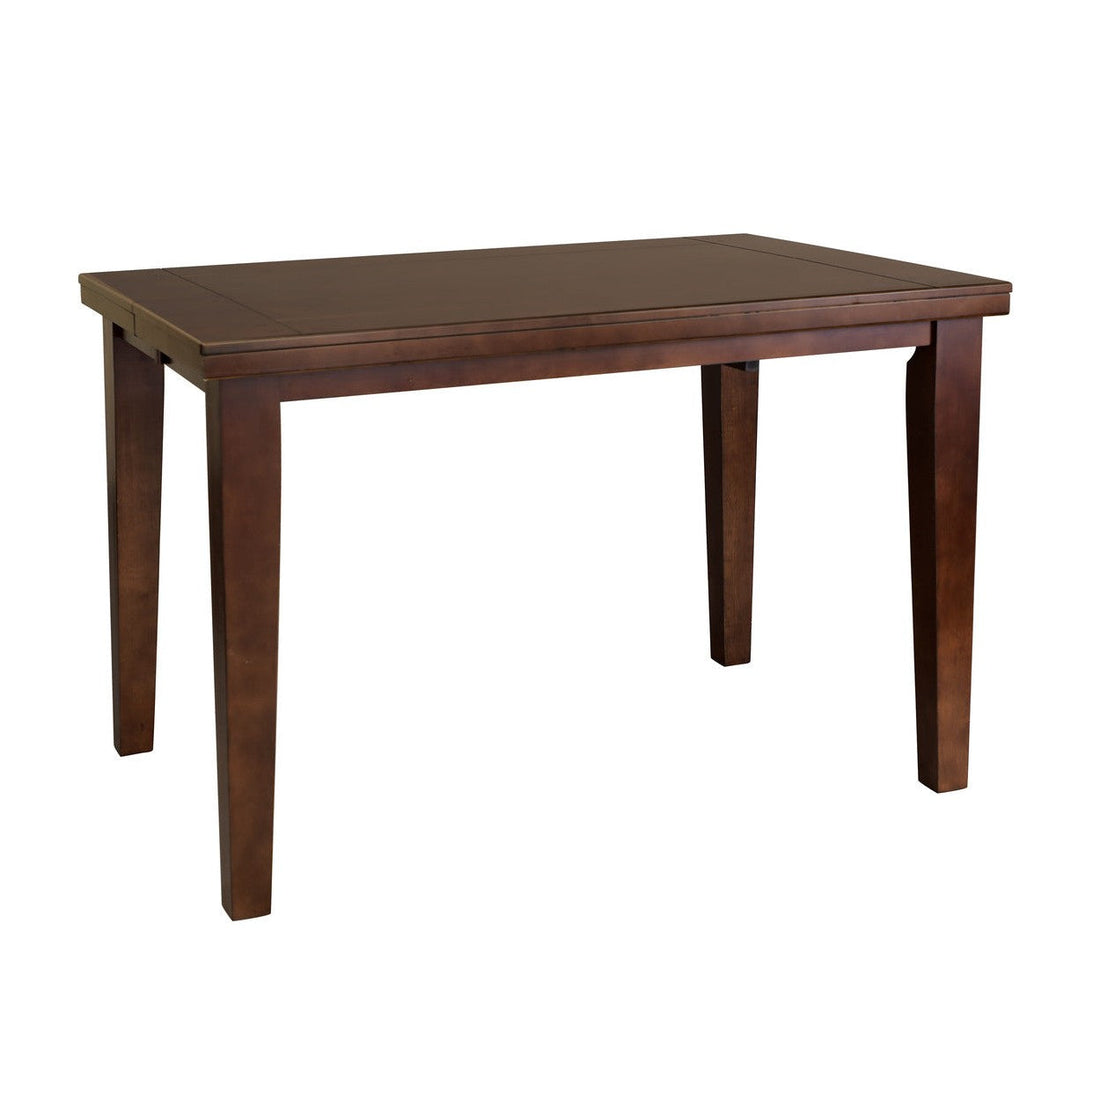 SQ COUNTER HEIGHT TABLE, BUTTERFLY LEAF 586-36